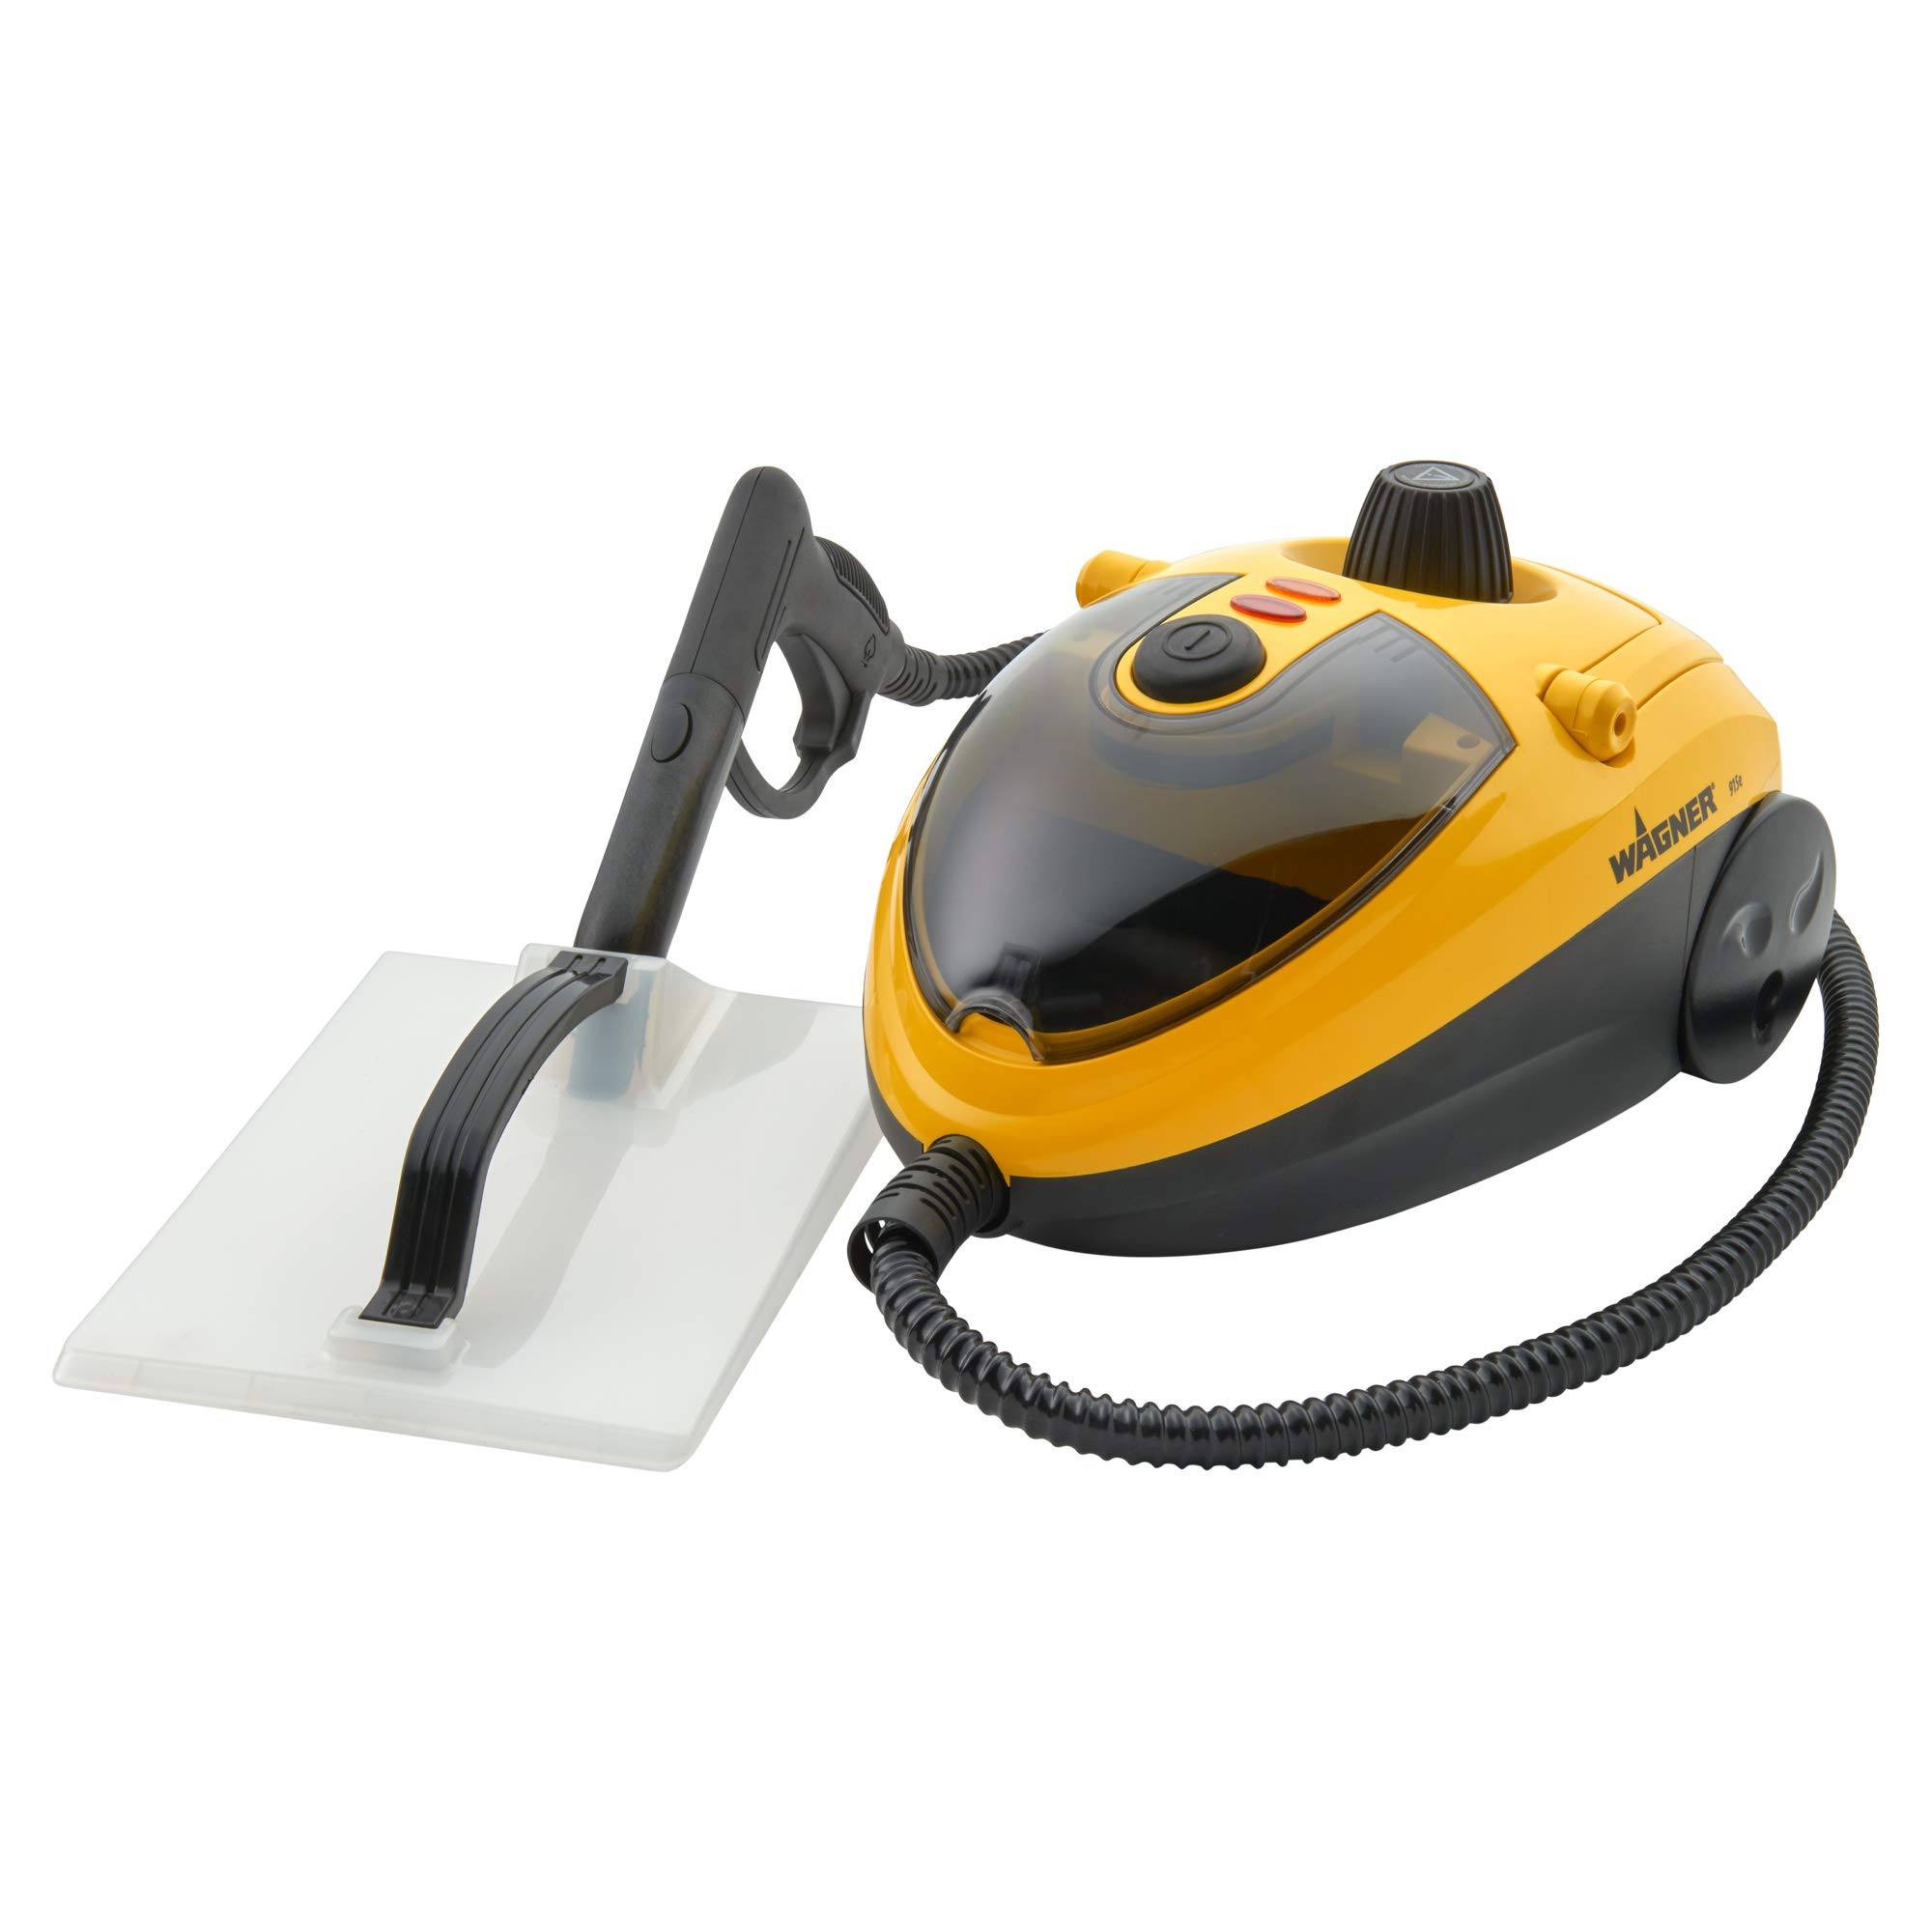 Wagner Spraytech 0282014 915e On-Demand Steam Cleaner & Wallpaper Removal, Multipurpose Power Steamer, 18 Attachments Included (Some Pieces Included in Storage Compartment)